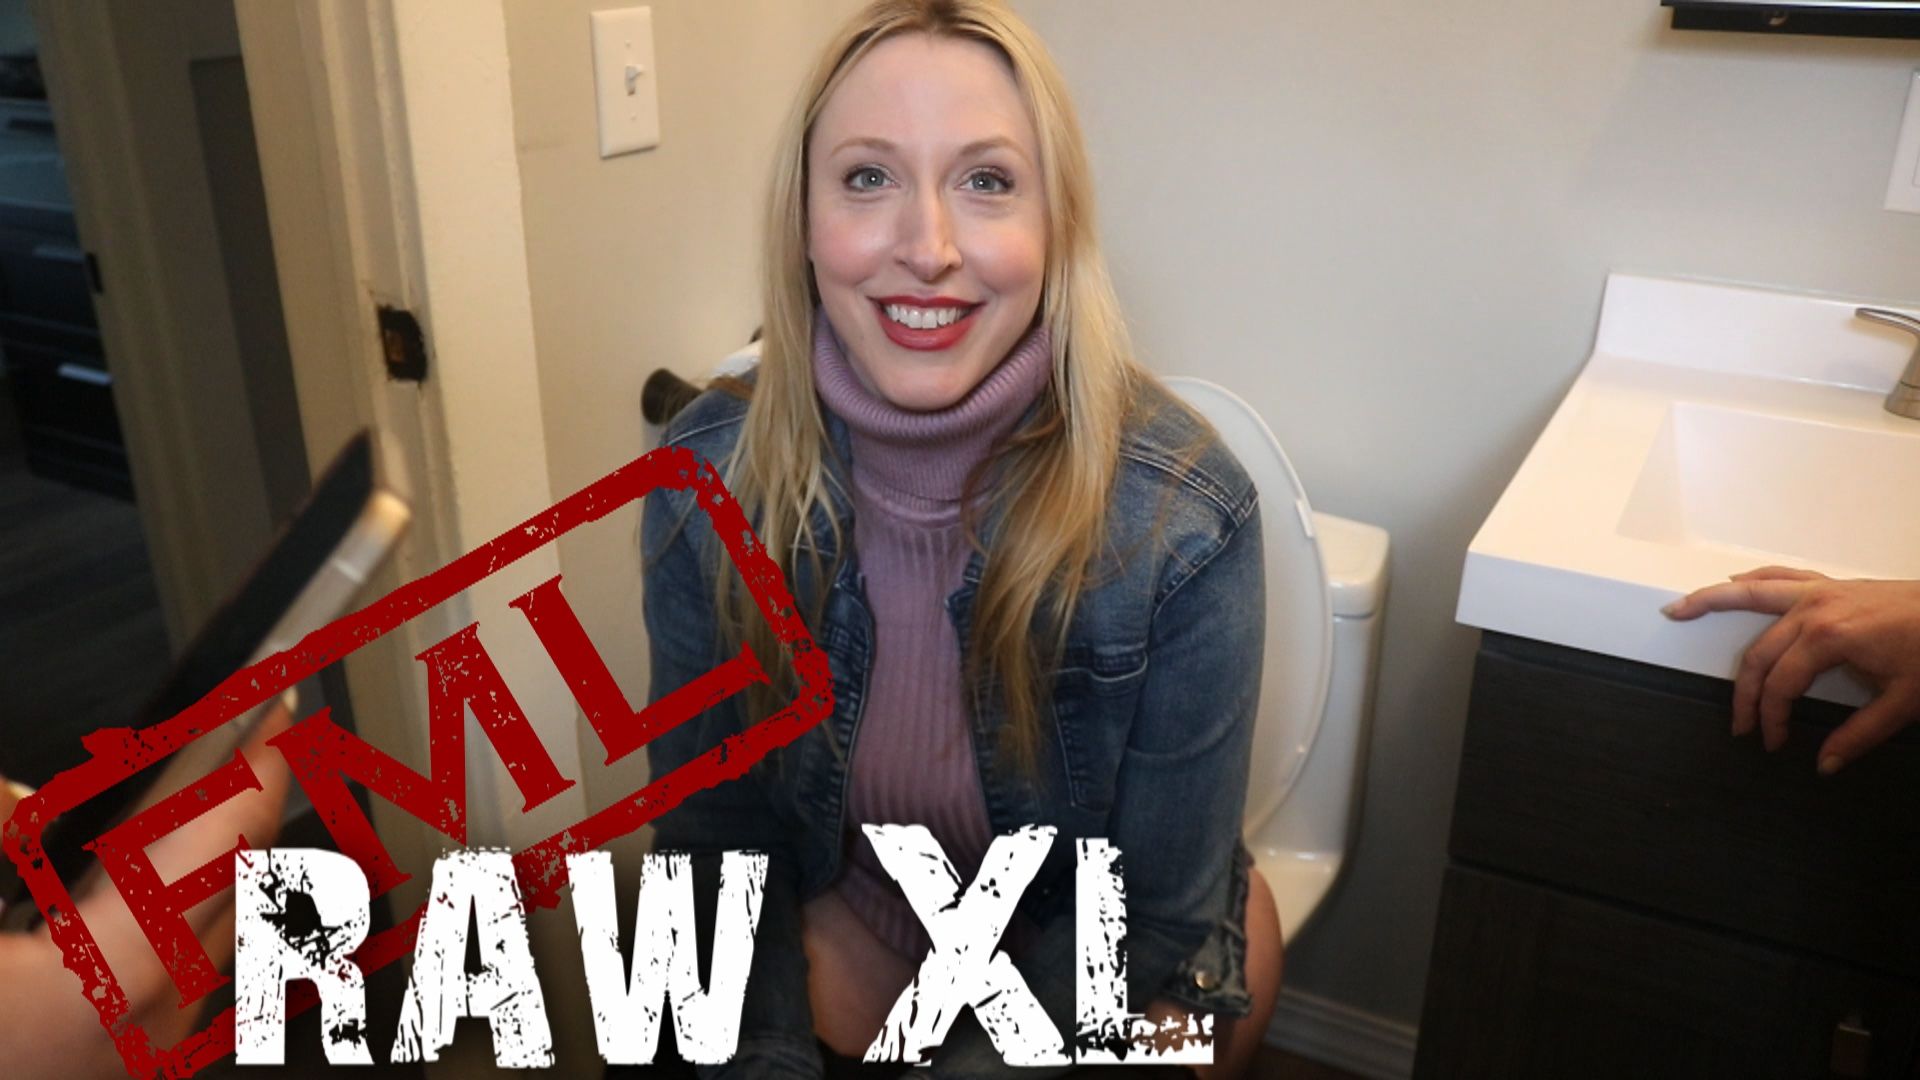 RAW XL: Beyond the Call of Doody 